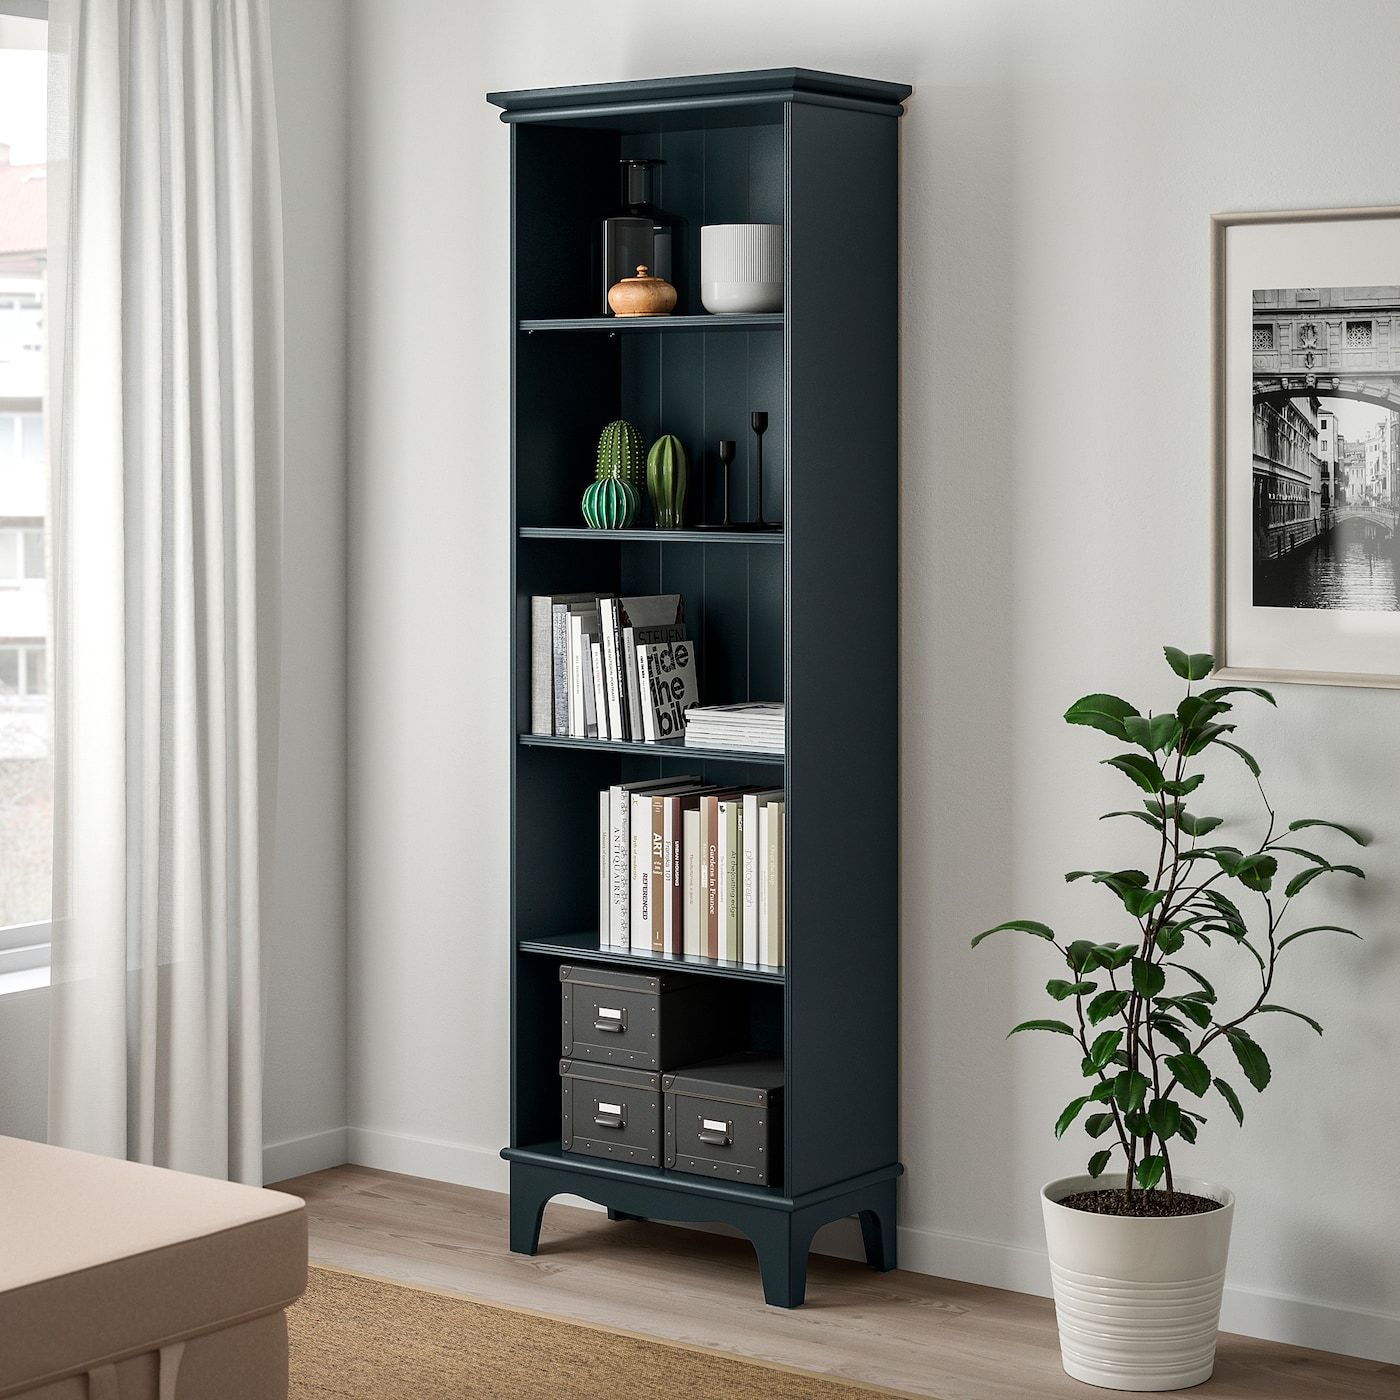 Lommarp Dark Blue Green, Bookcase, 65x199 Cm – Ikea In Navy Blue Bookcases (View 5 of 15)